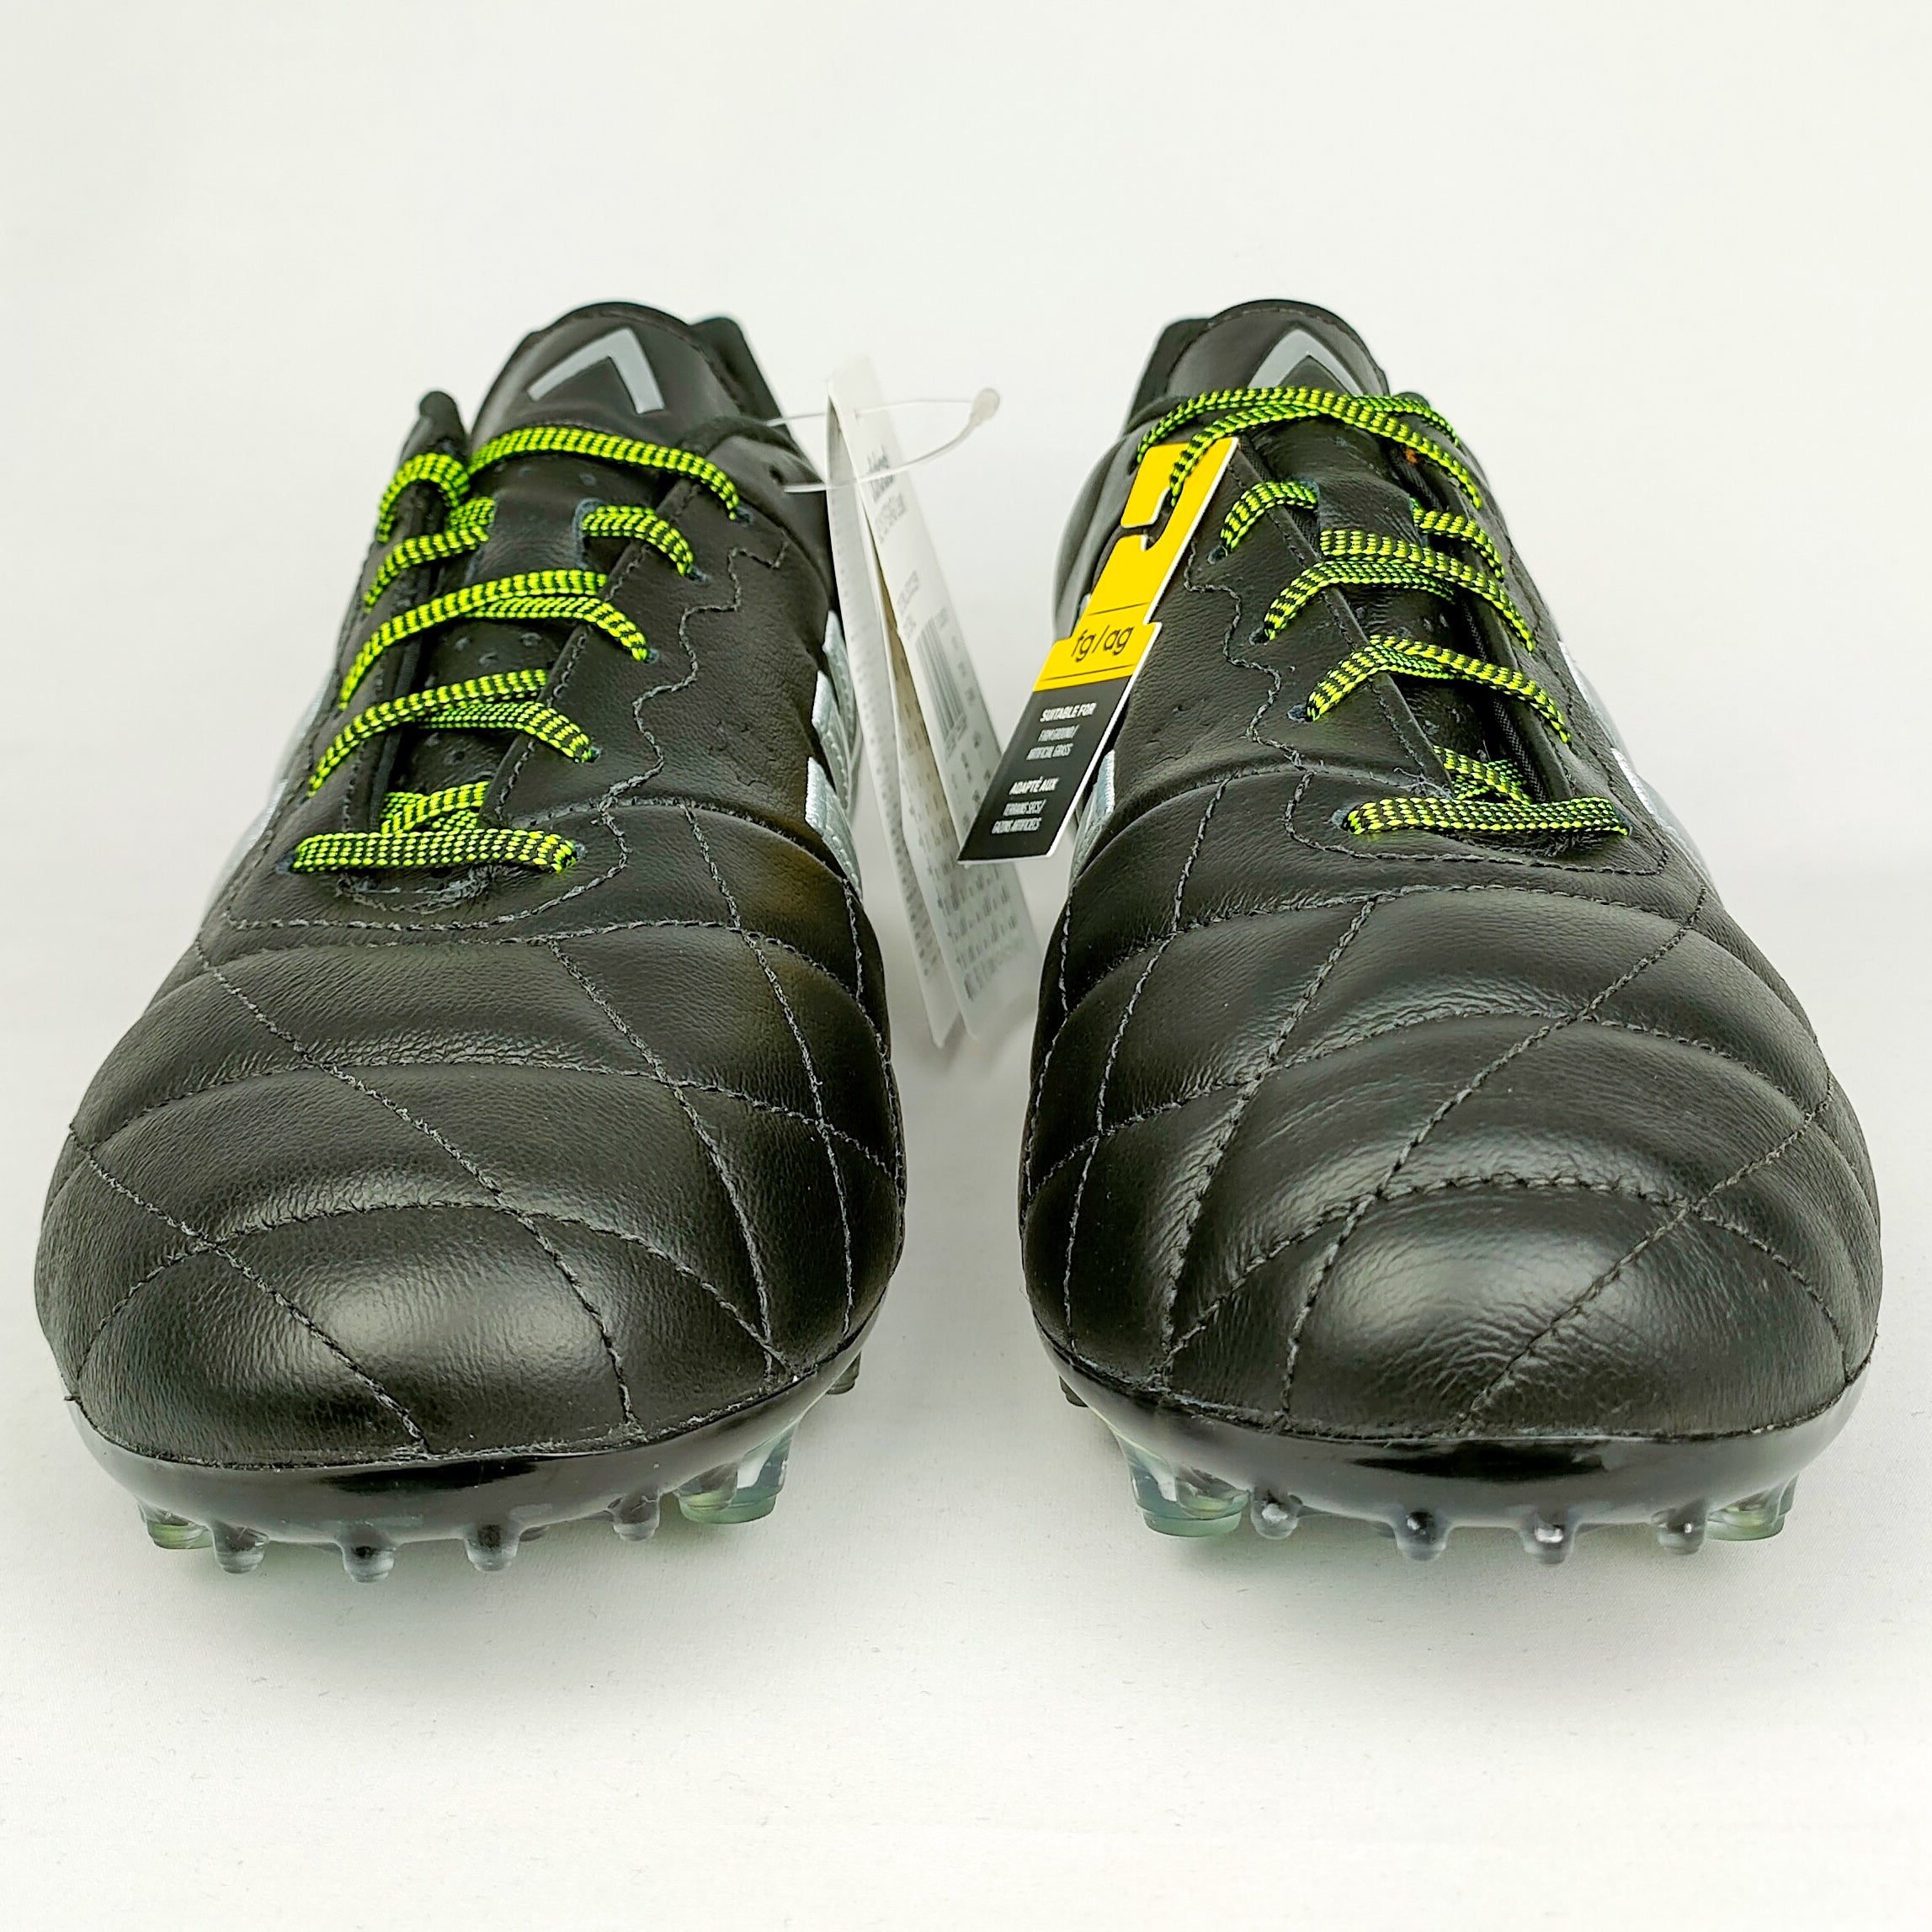 Adidas Ace 15.1 Leather FG/AG - Black/Silver Metallic/Solar Yellow Front View